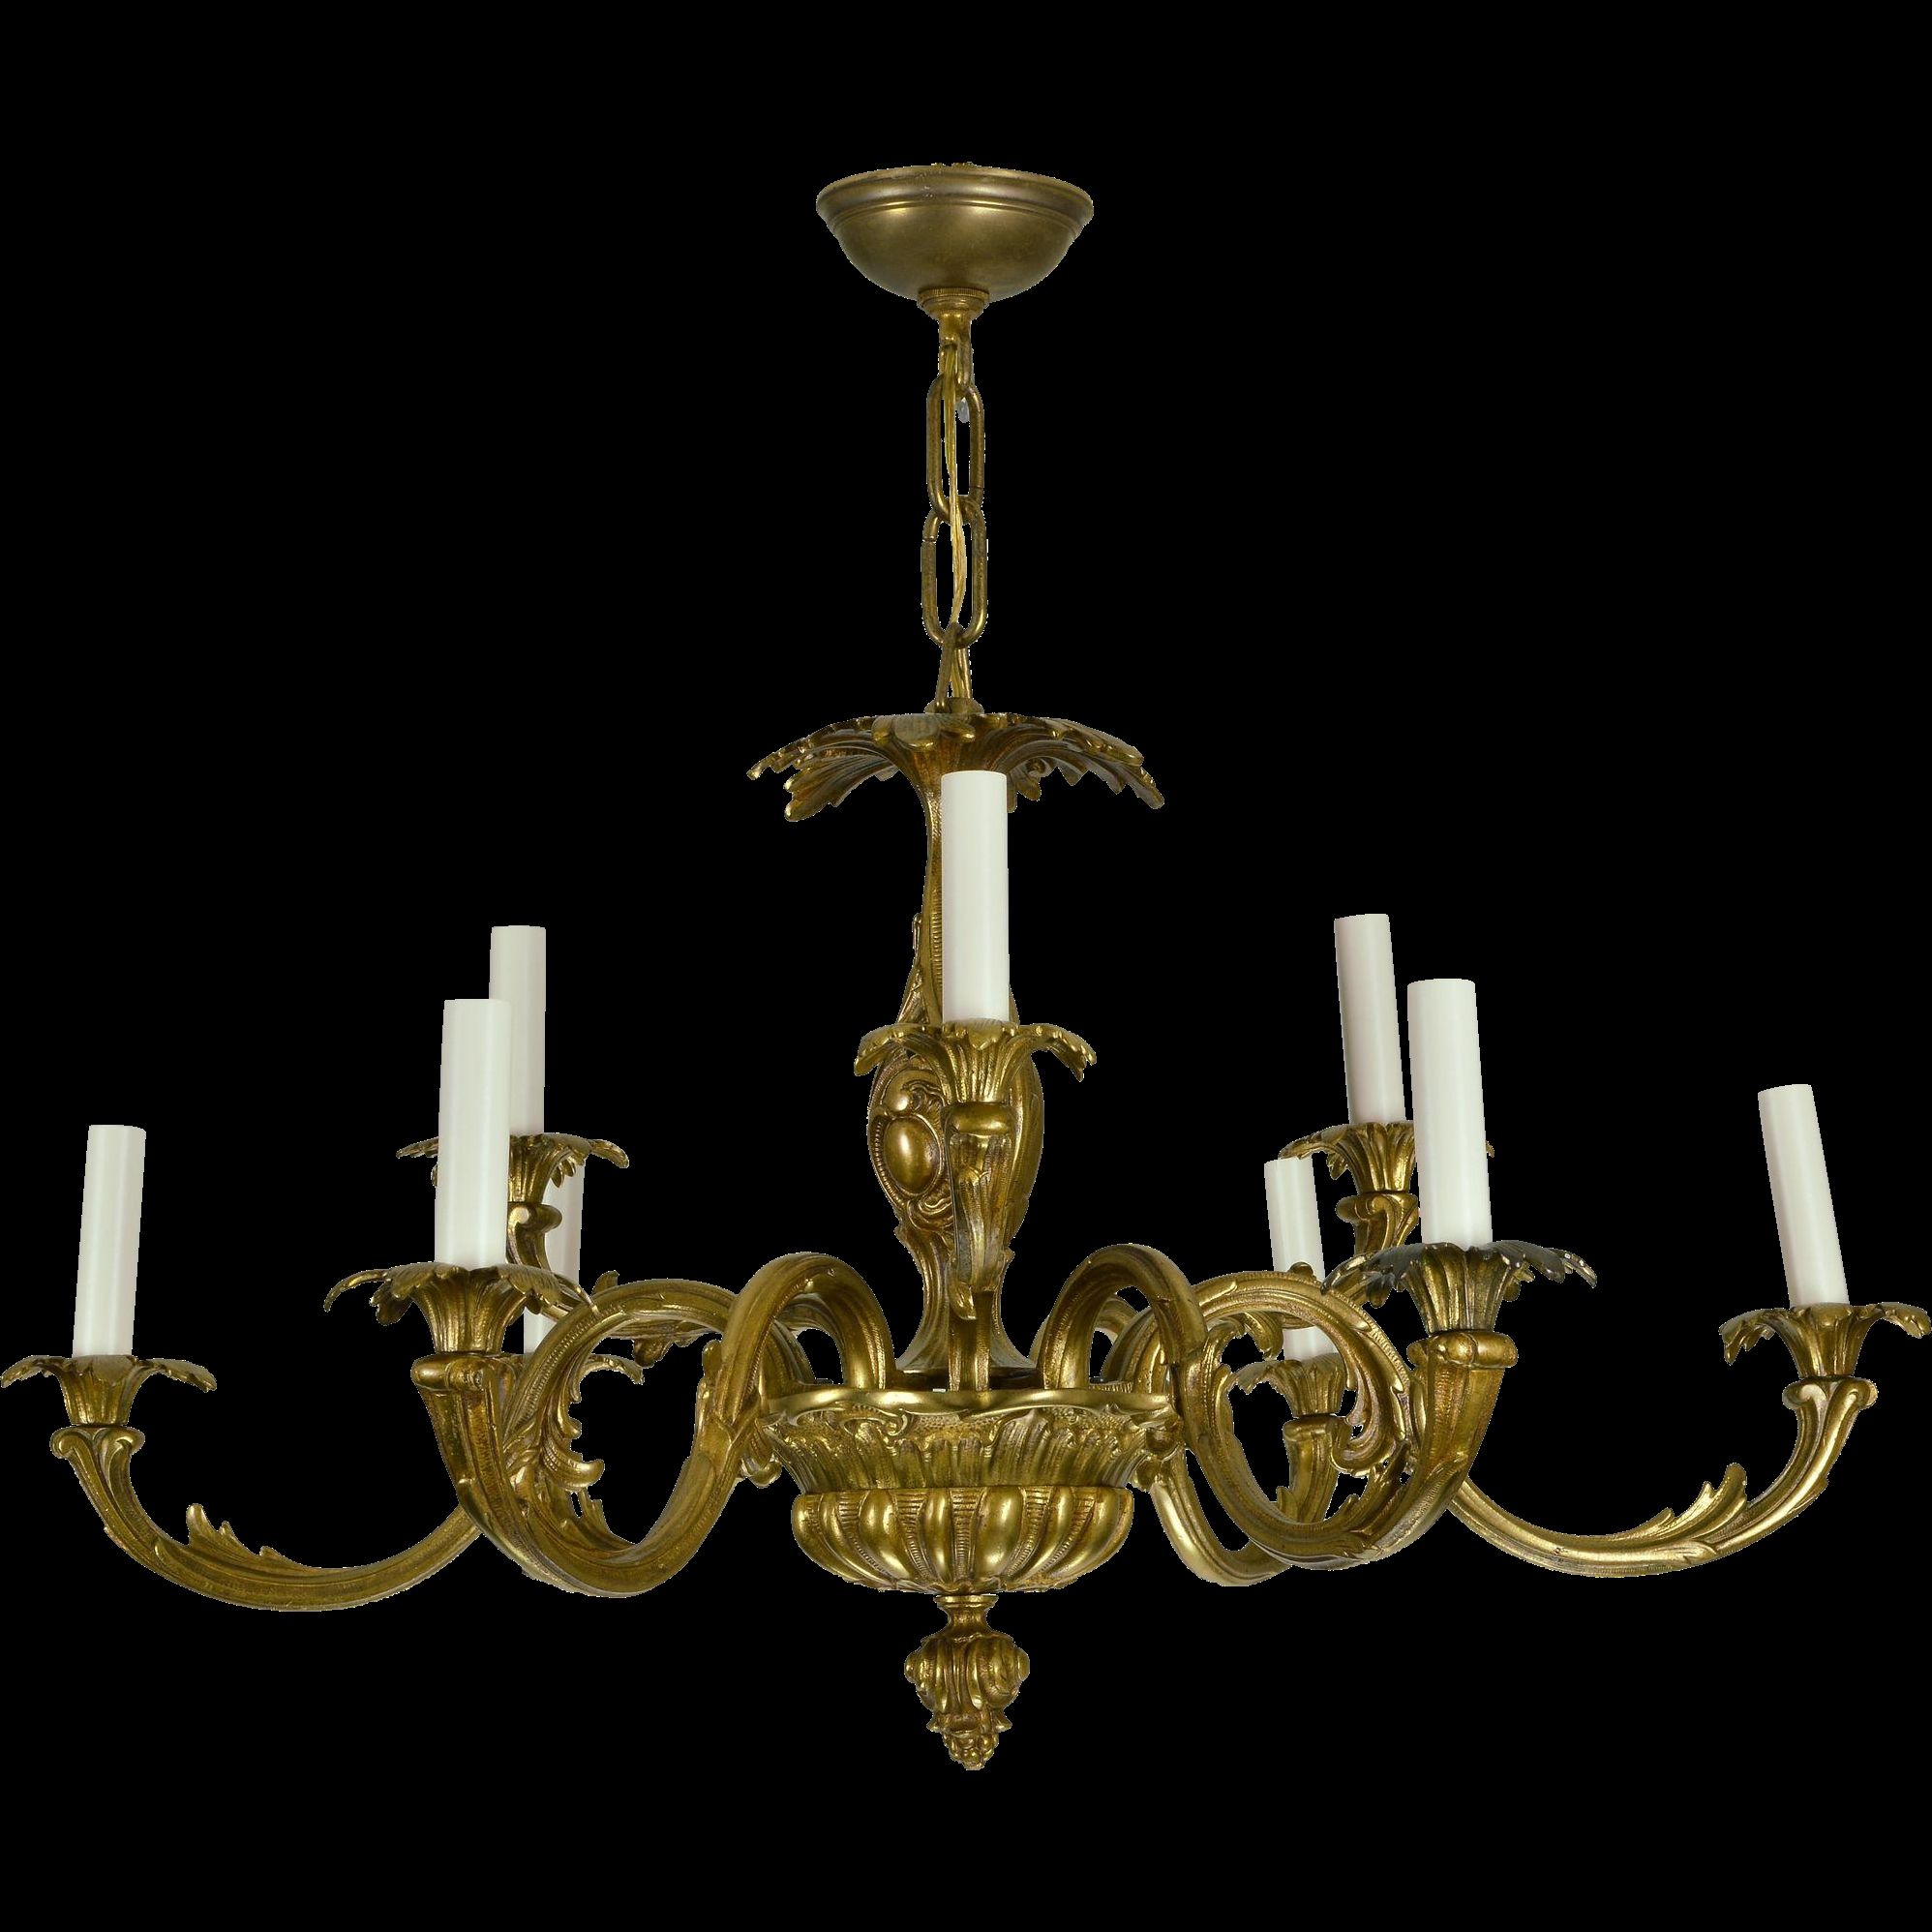 Vintage Brass French Baroque Chandelier From Tolw On Ru Lane With Regard To Large Brass Chandelier (View 4 of 12)